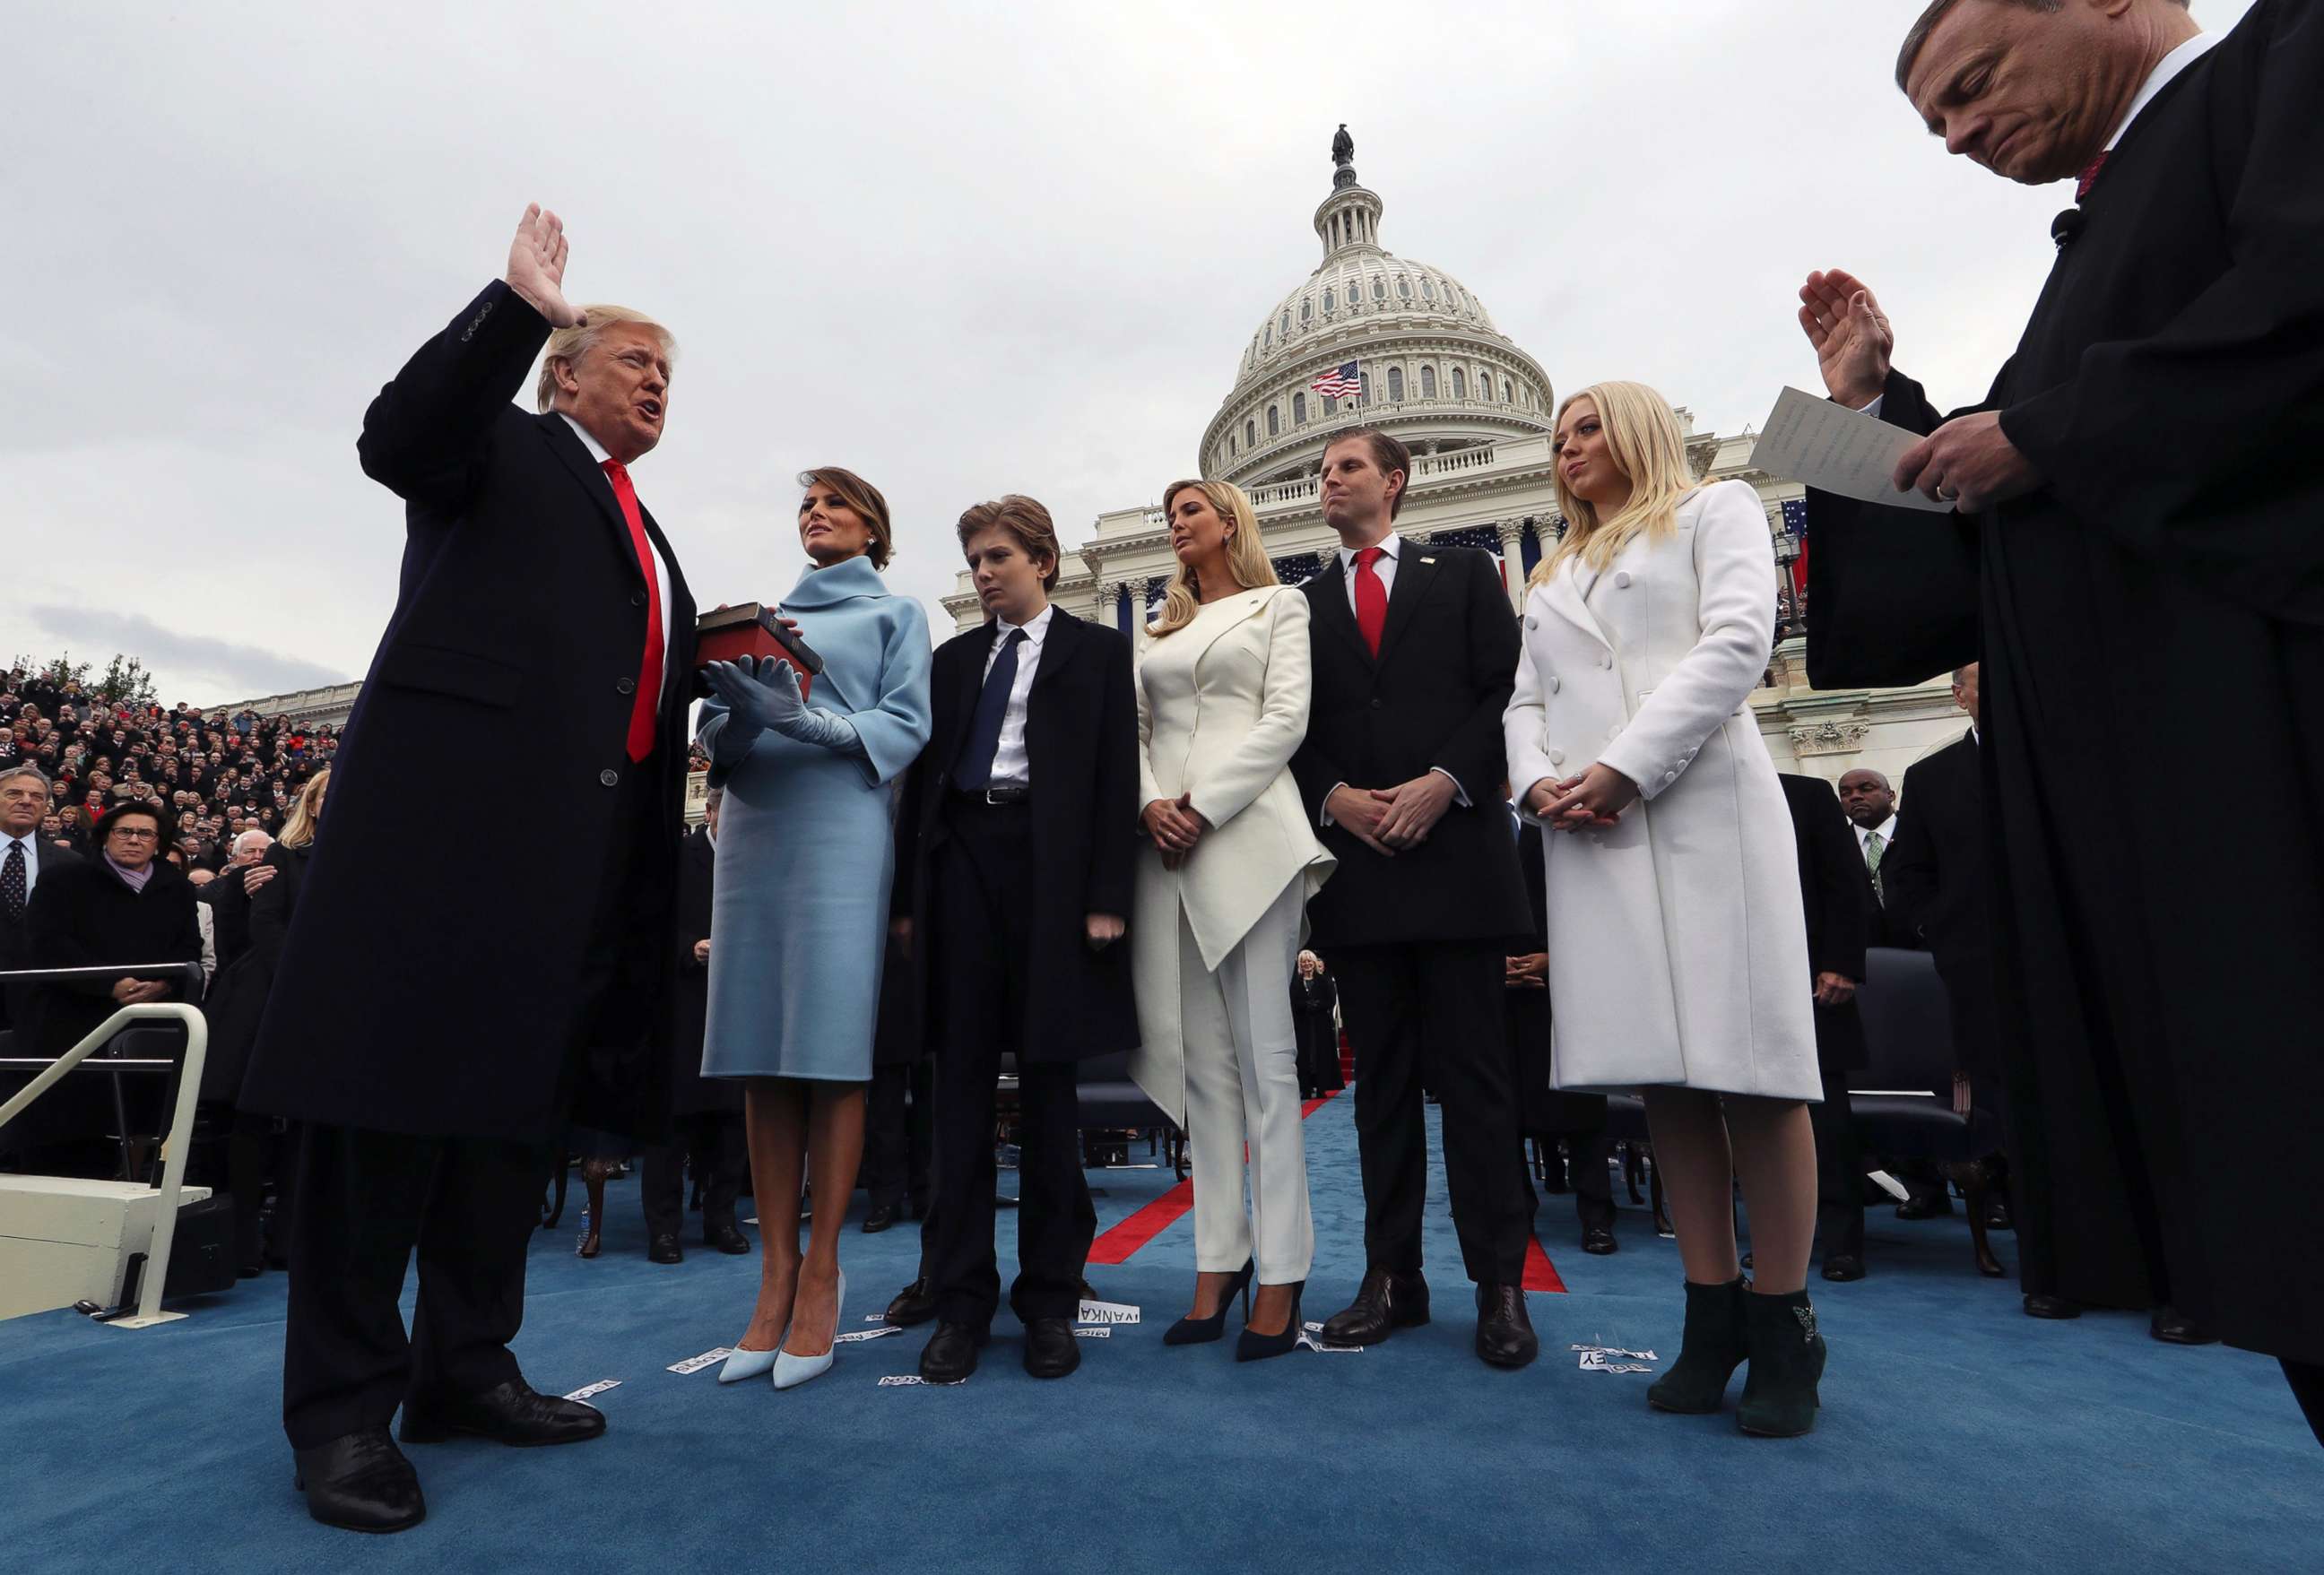 PHOTO: In this Jan. 20, 2017 file photo President Donald Trump takes the oath of office administered by Supreme Court Chief Justice John Roberts at the Capitol, in Washington D.C.